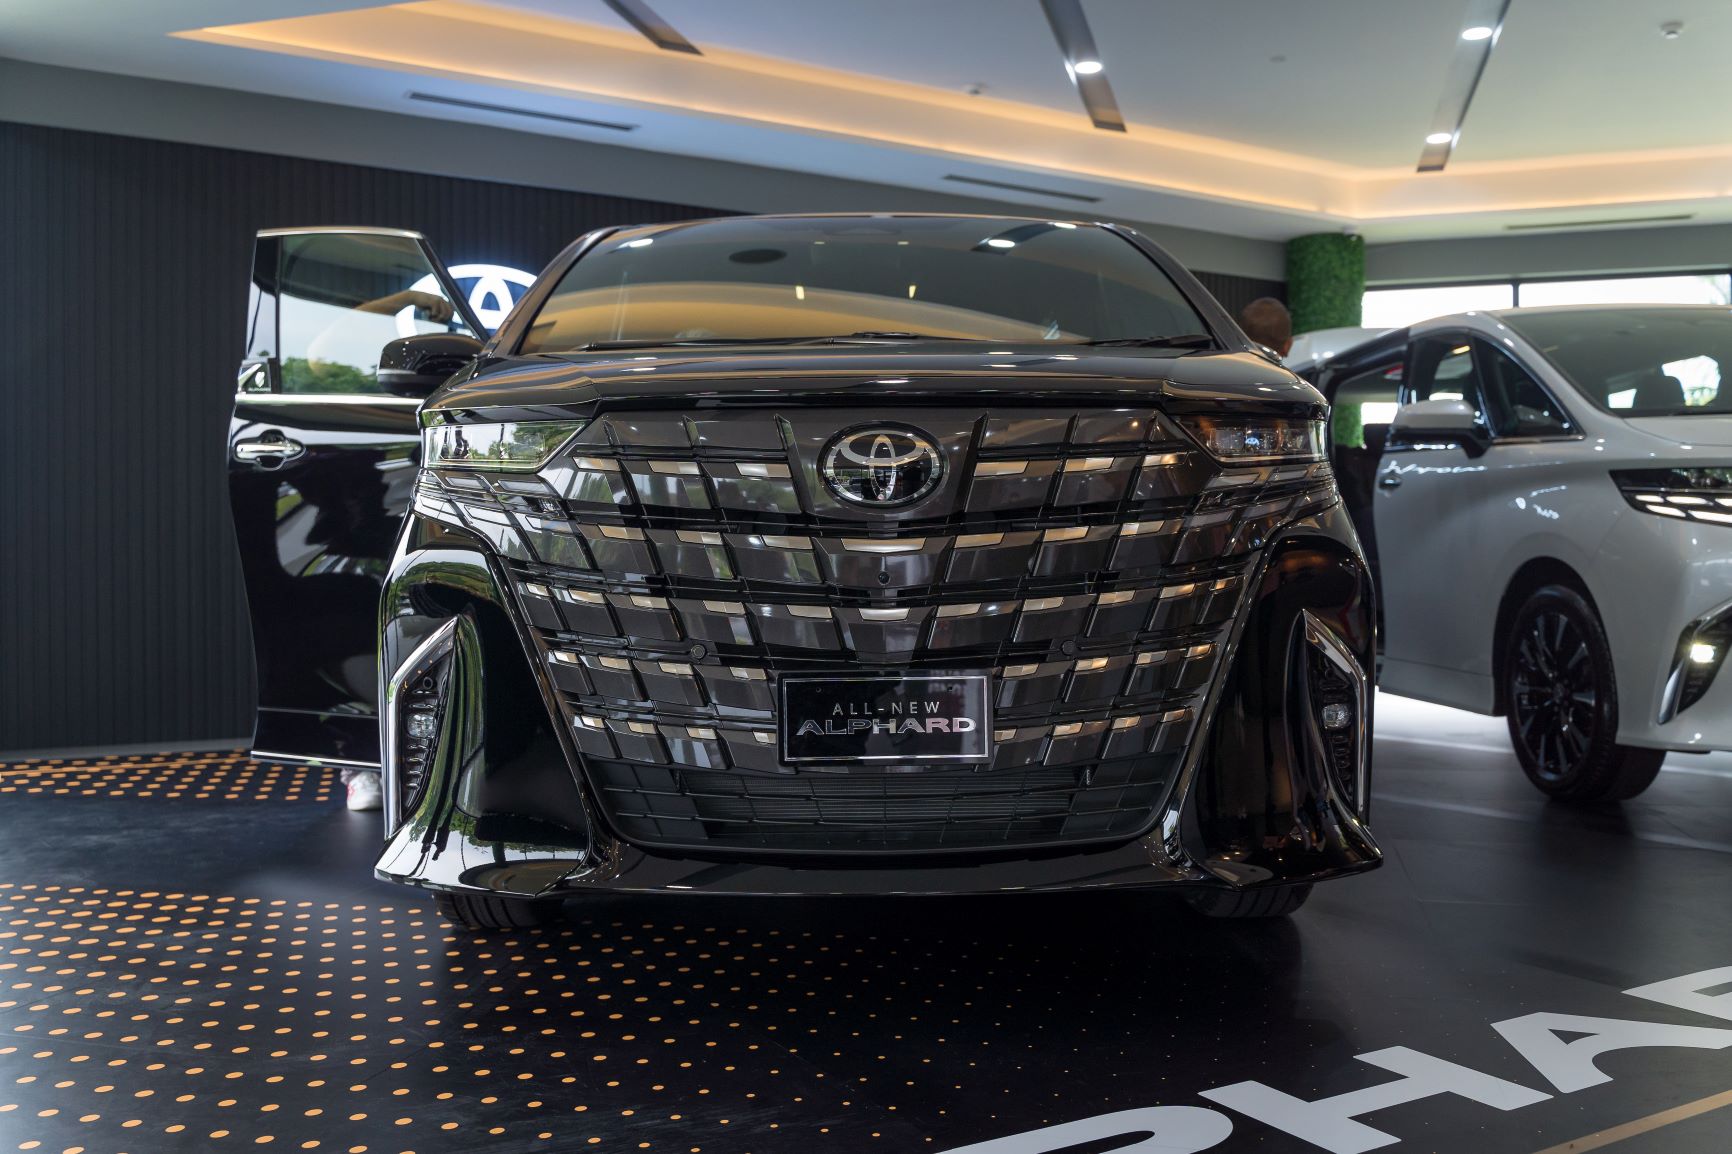 Toyota Alphard: An ideal family car designed with luxury and